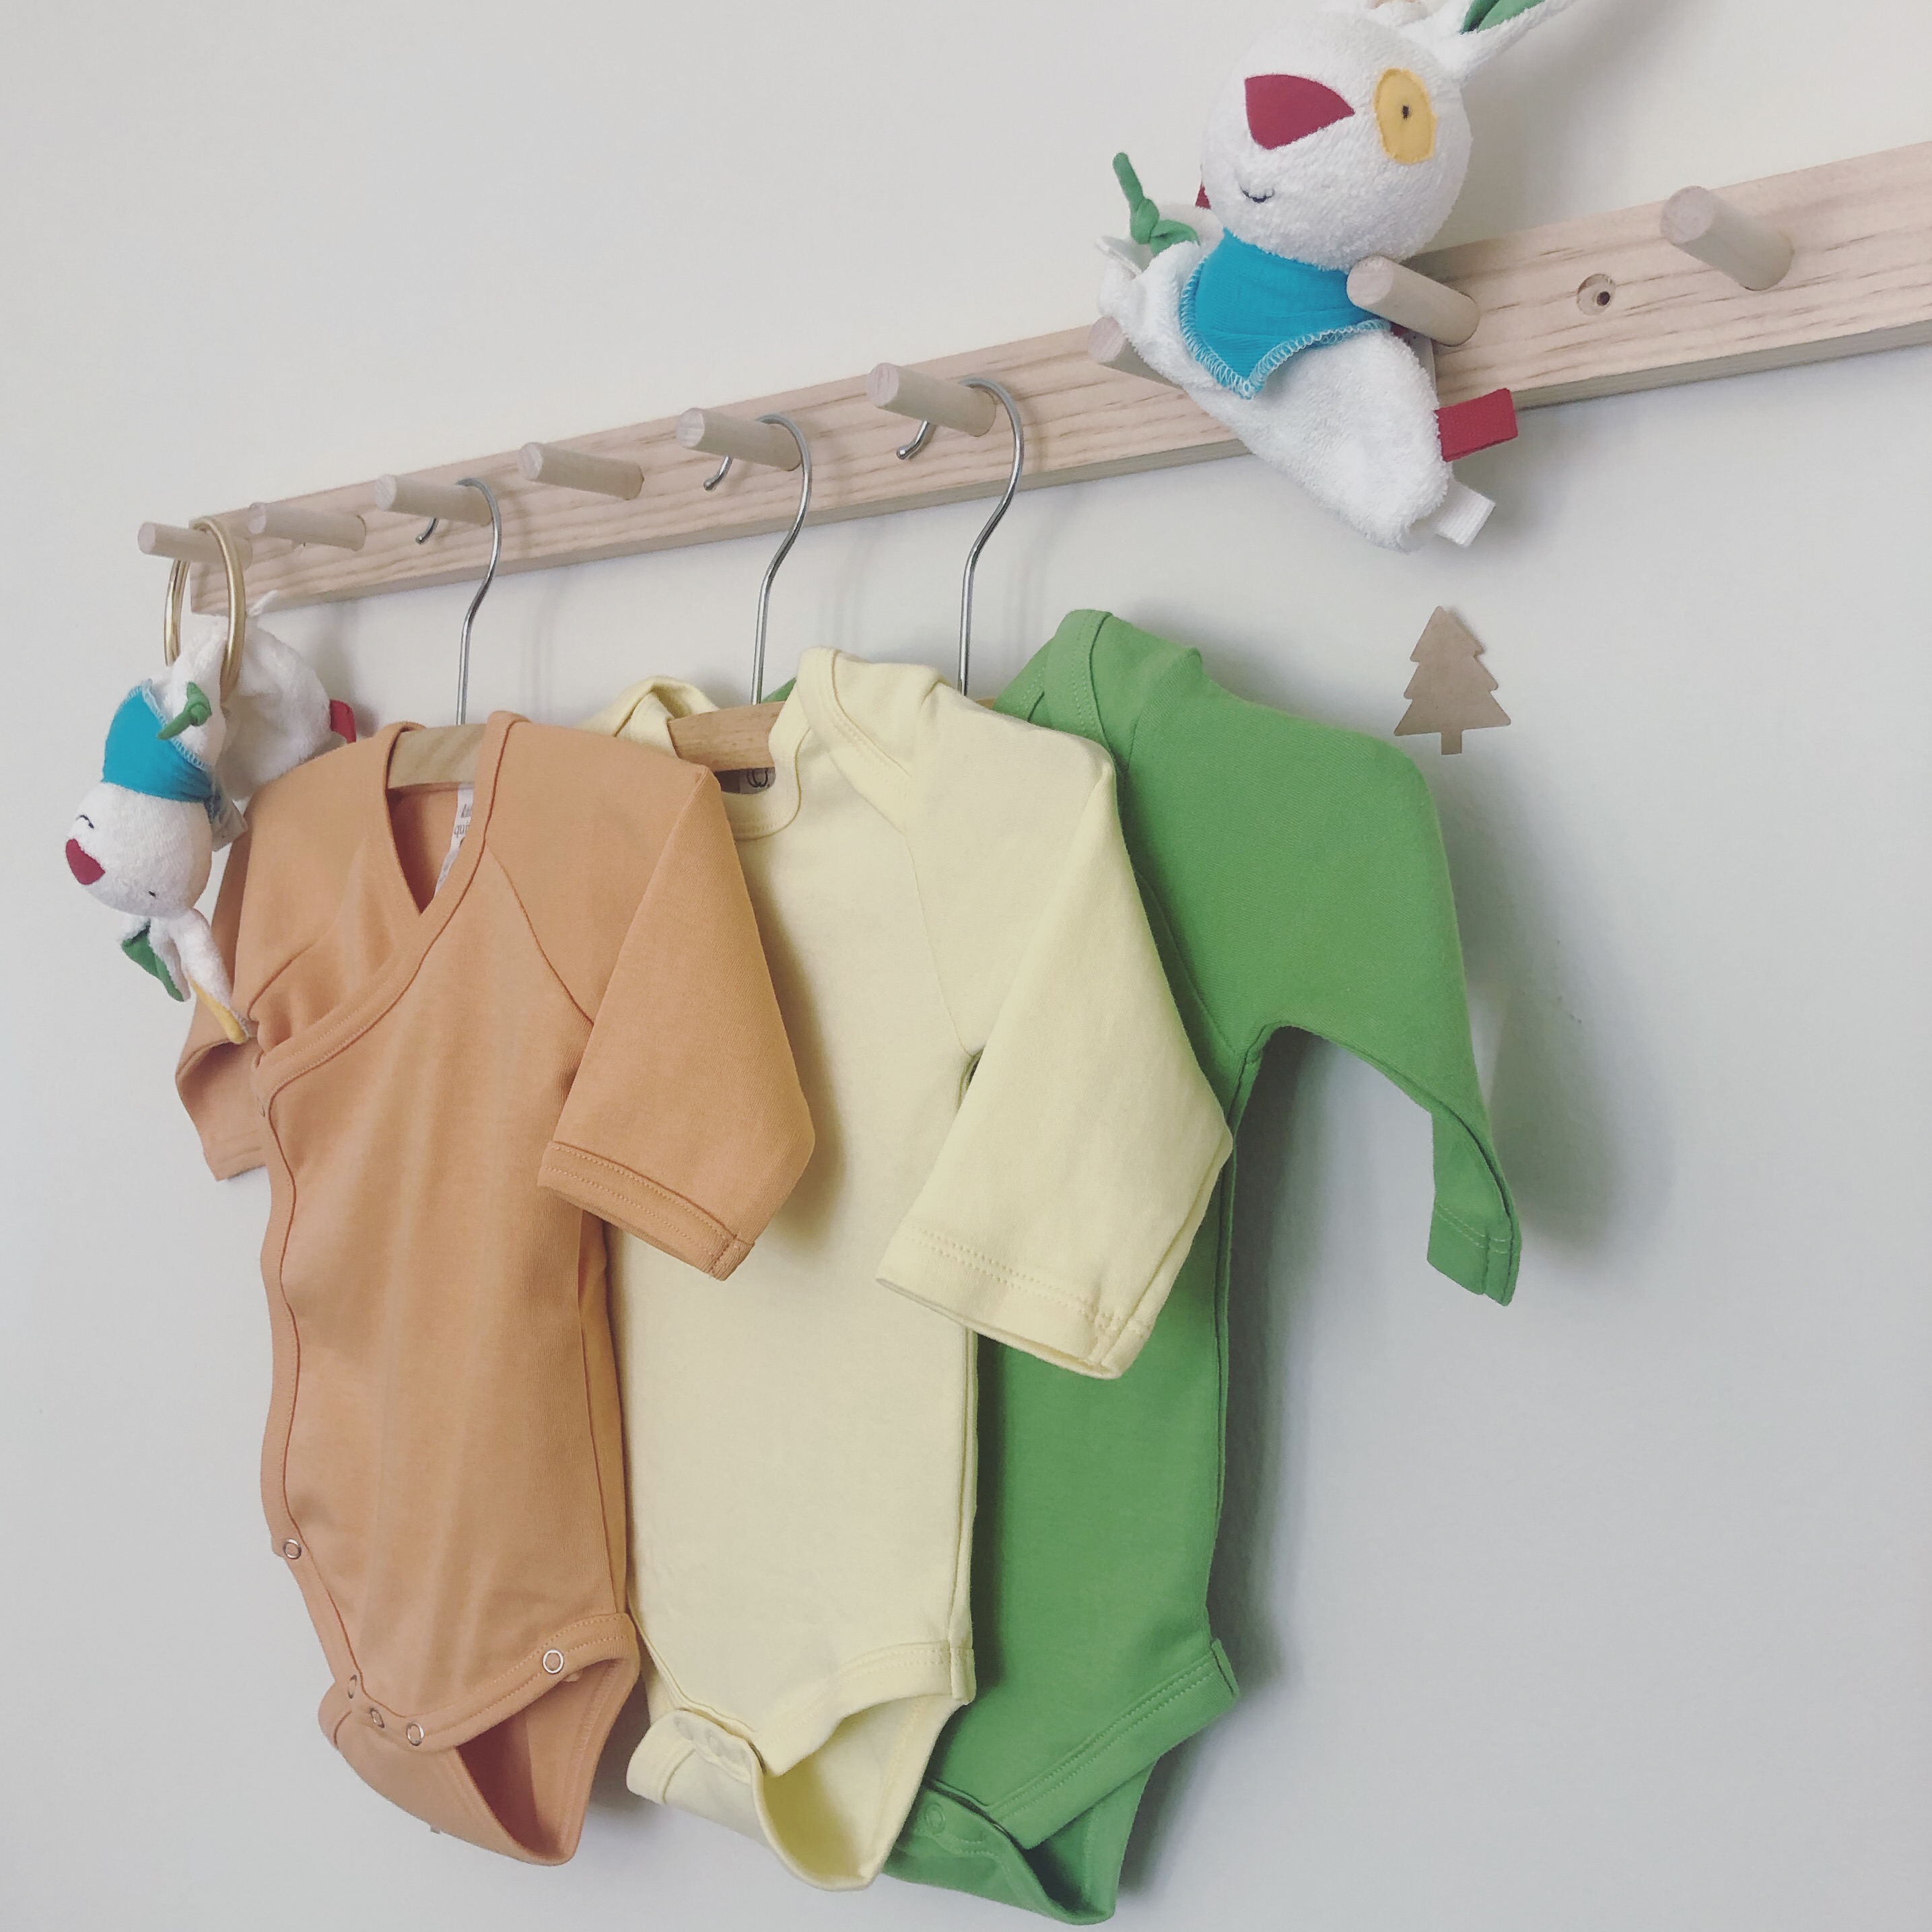 Colorful organic cotton baby bodysuits hanging on a rack